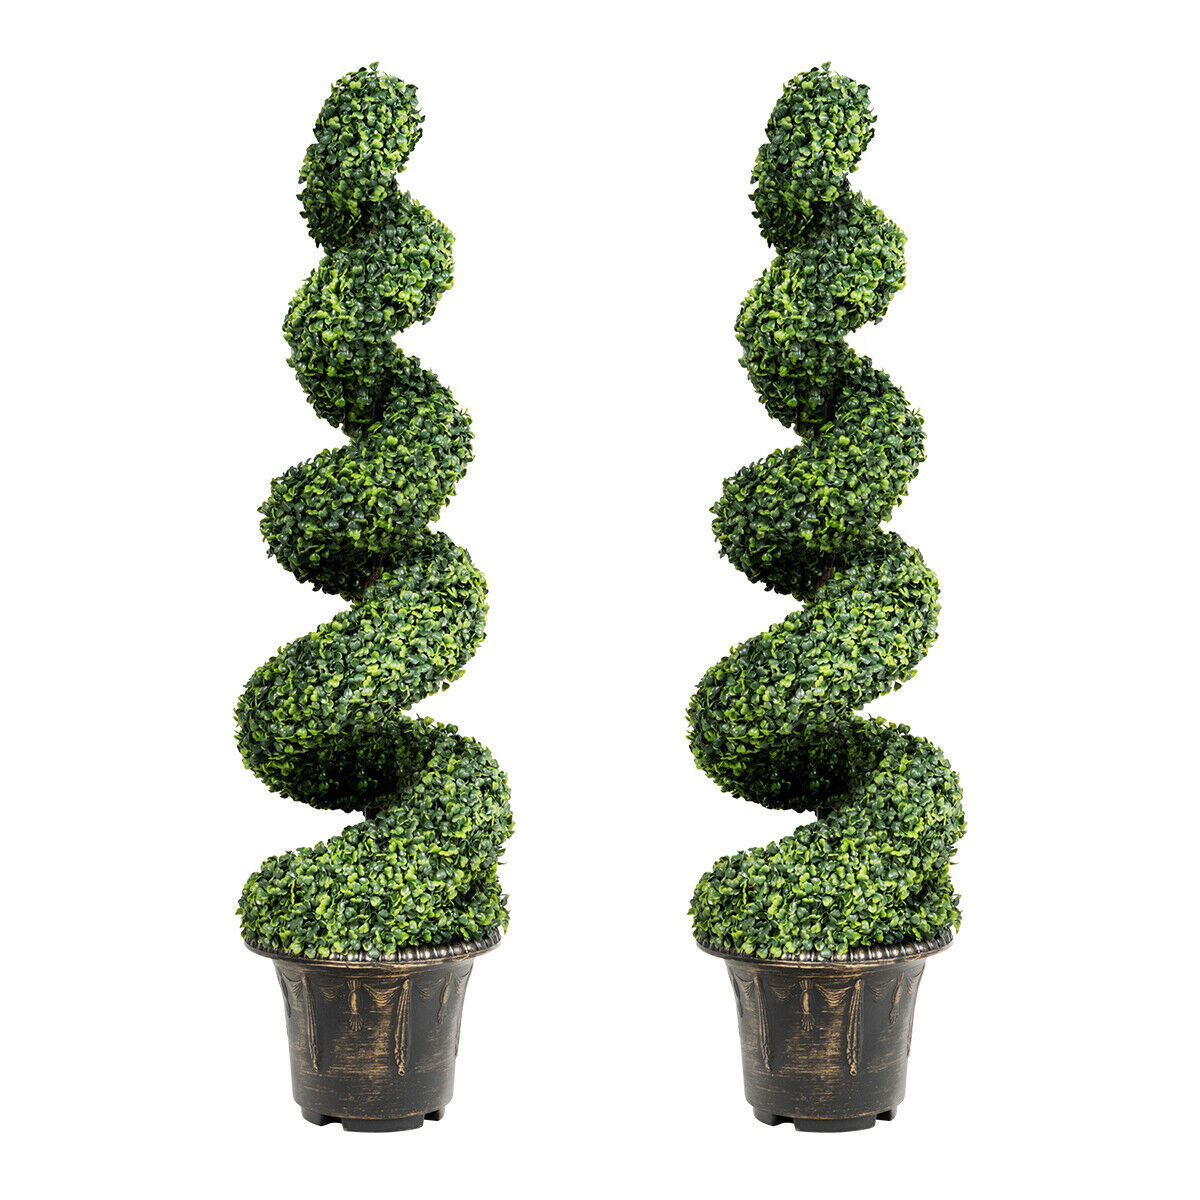 2Pcs 4FT Artificial Boxwood Spiral Tree W/Realistic Leaves Indoor Outdoor Office